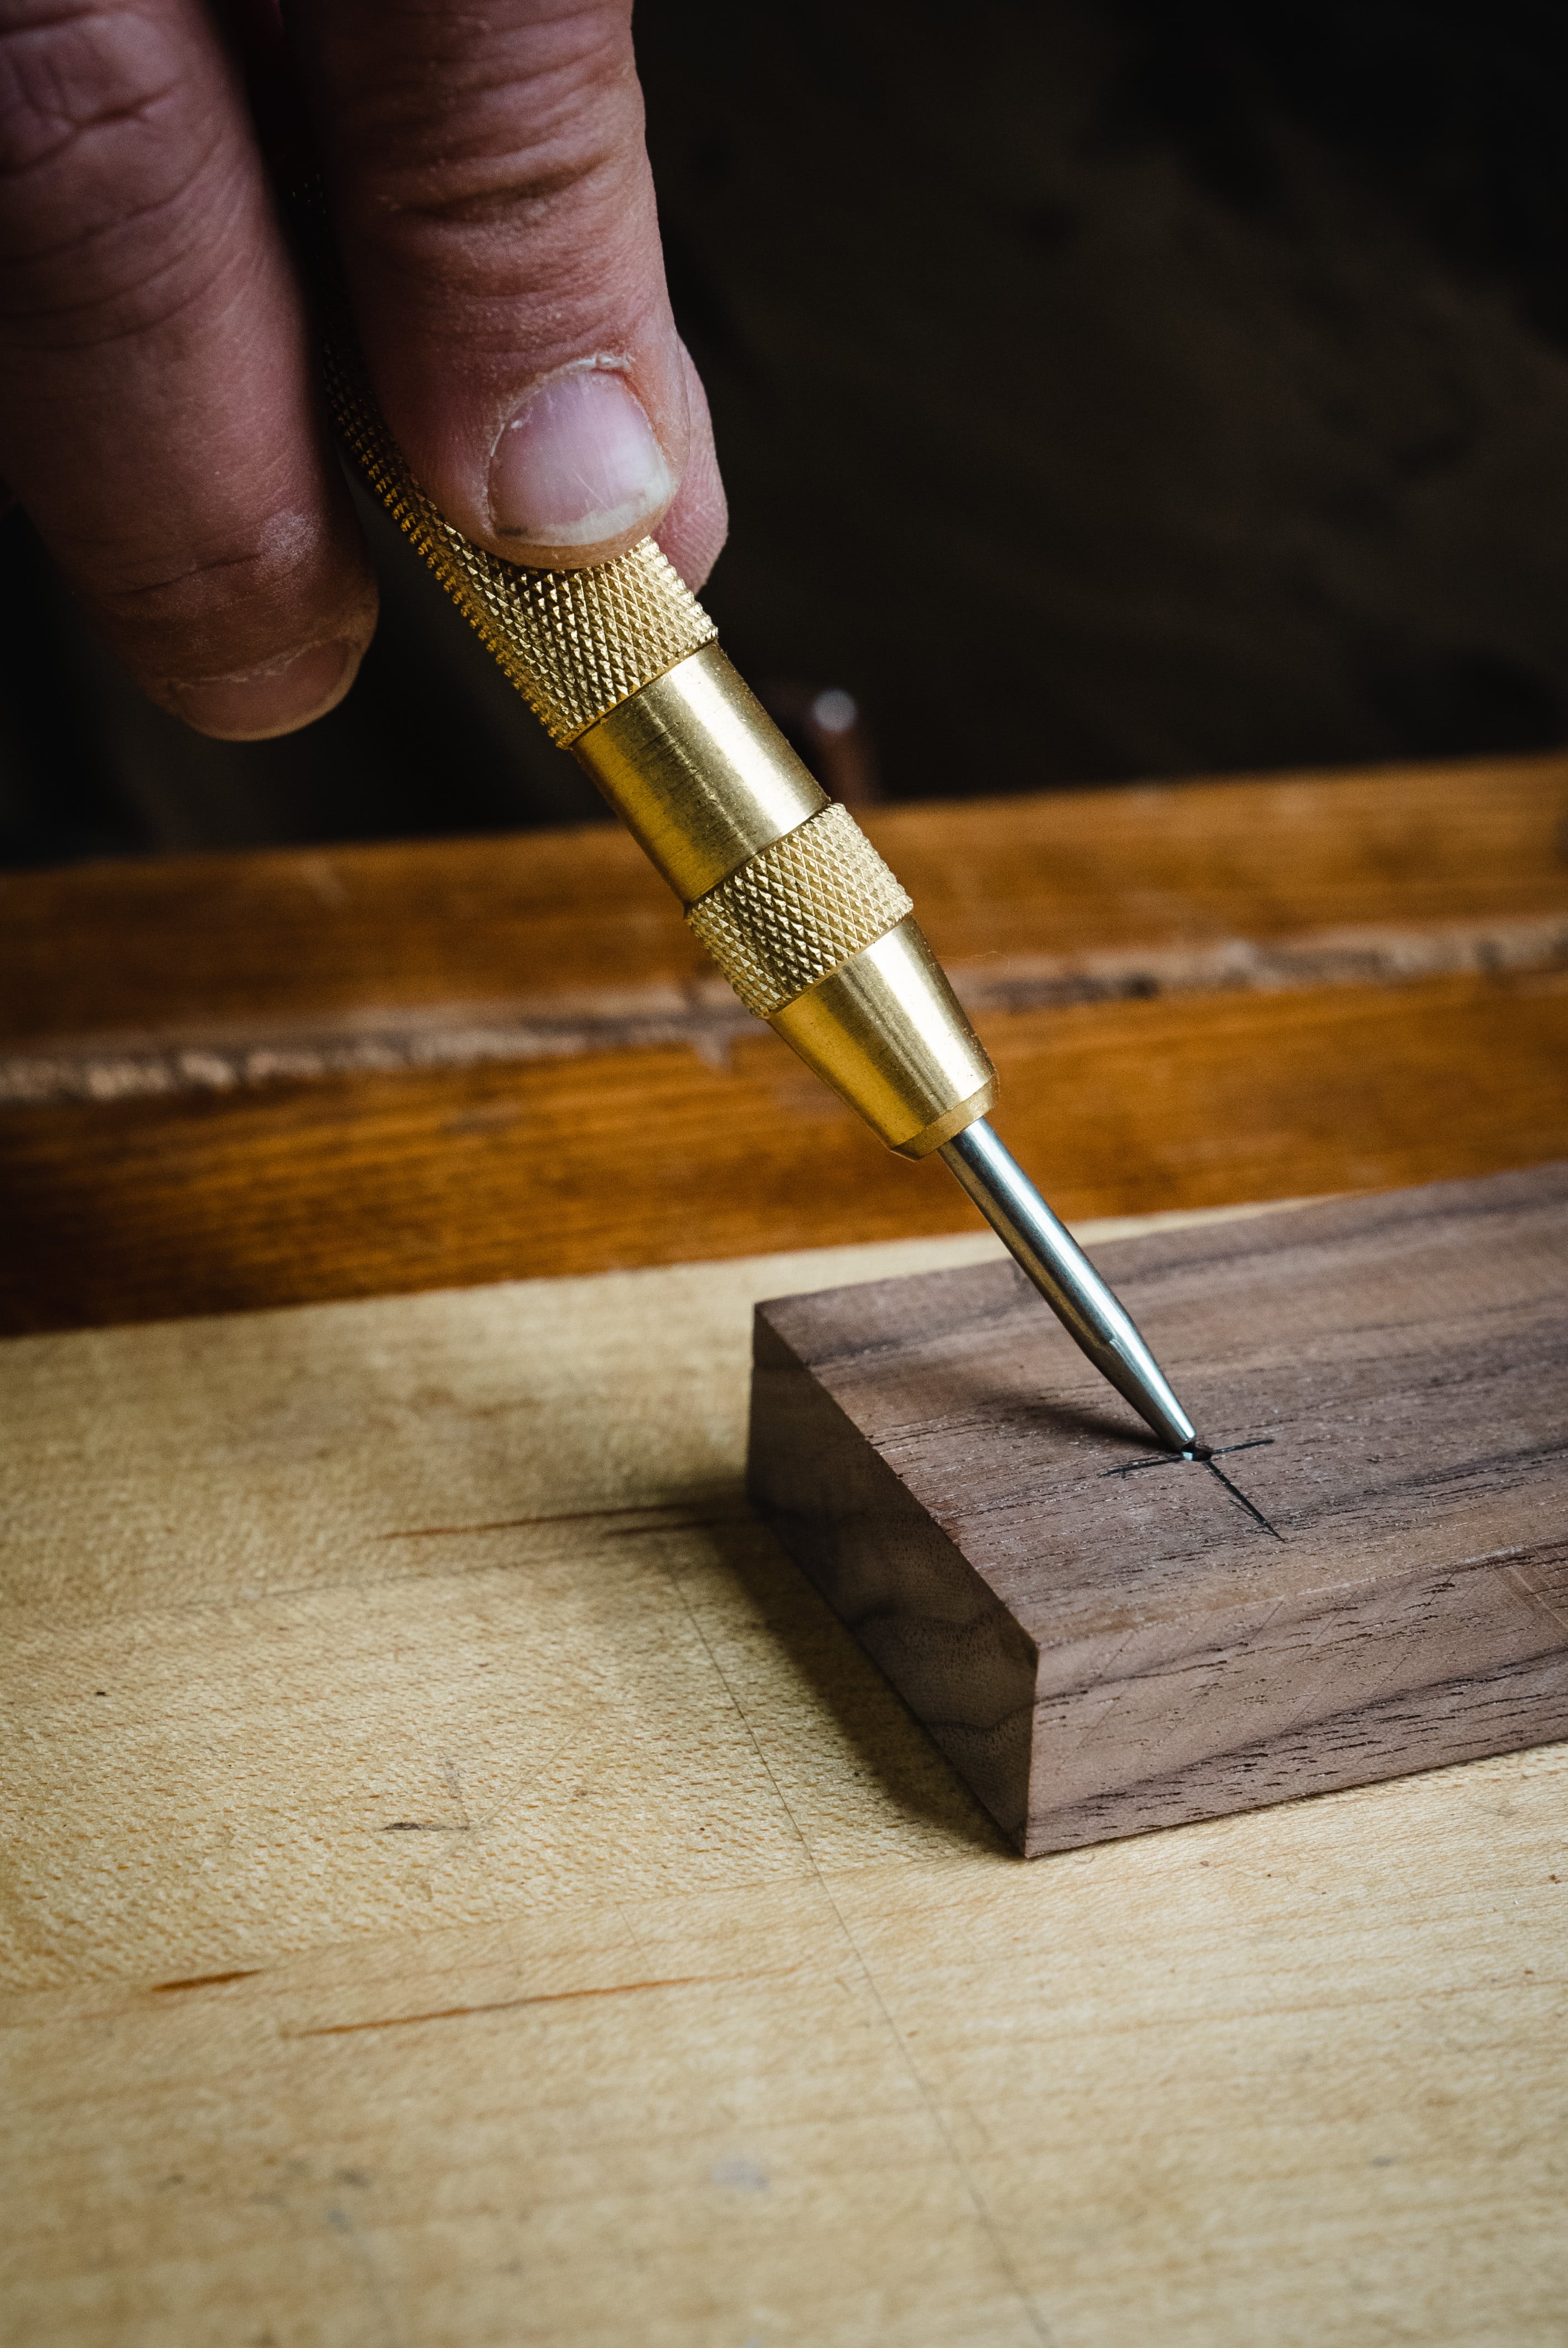 Center Punch : Basic Tools of the craftsman 